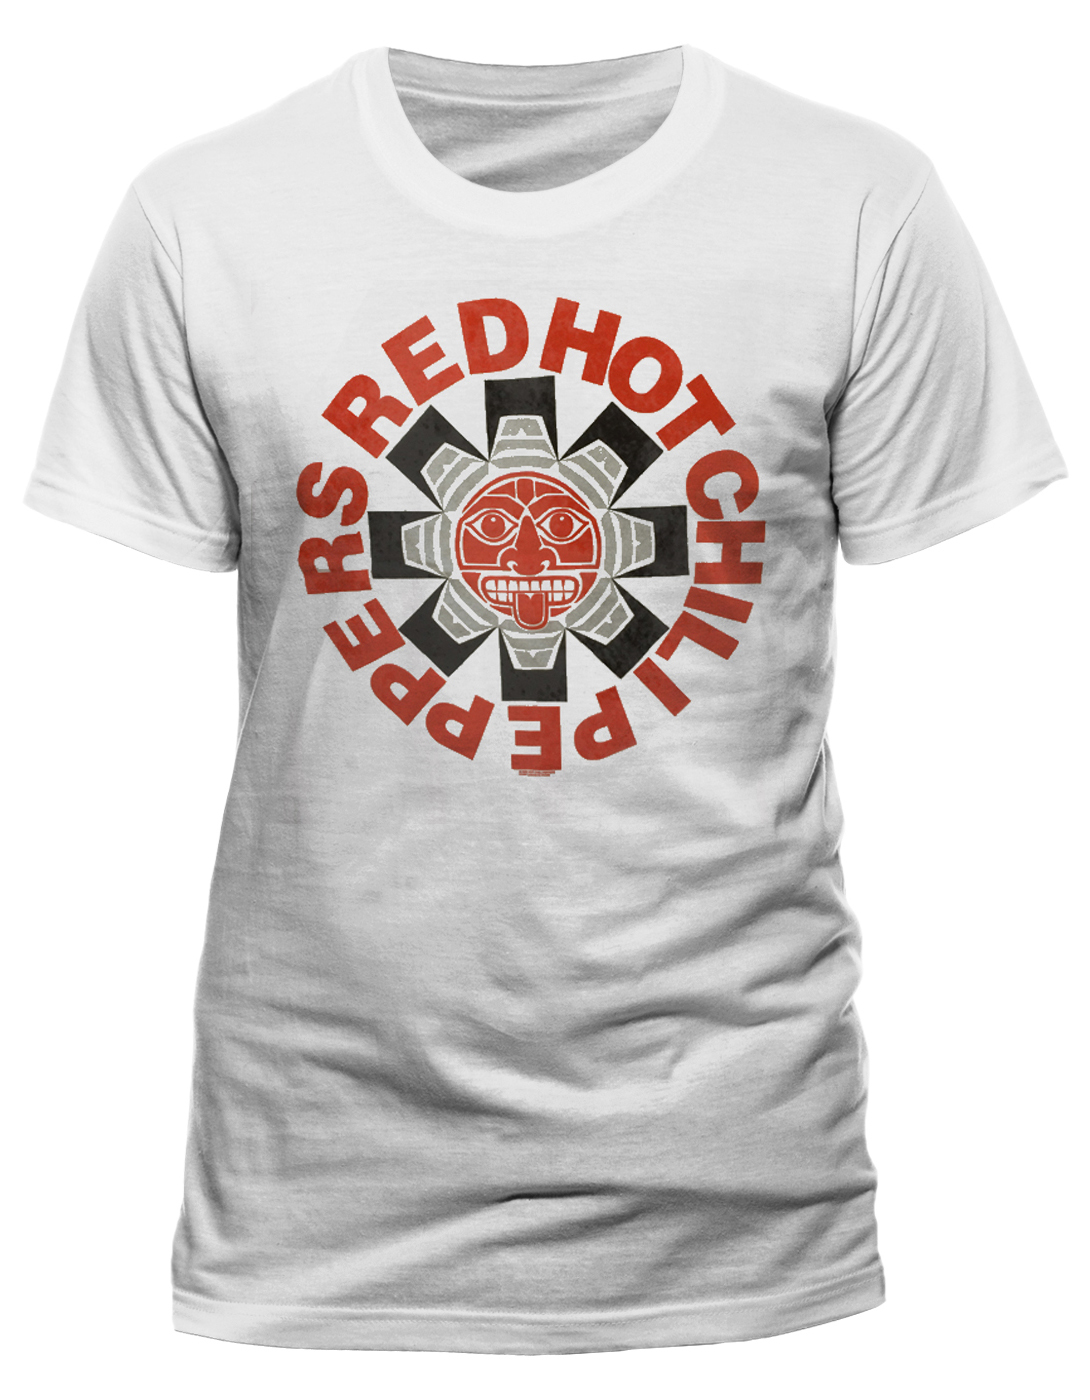 shirt red hot chili peppers